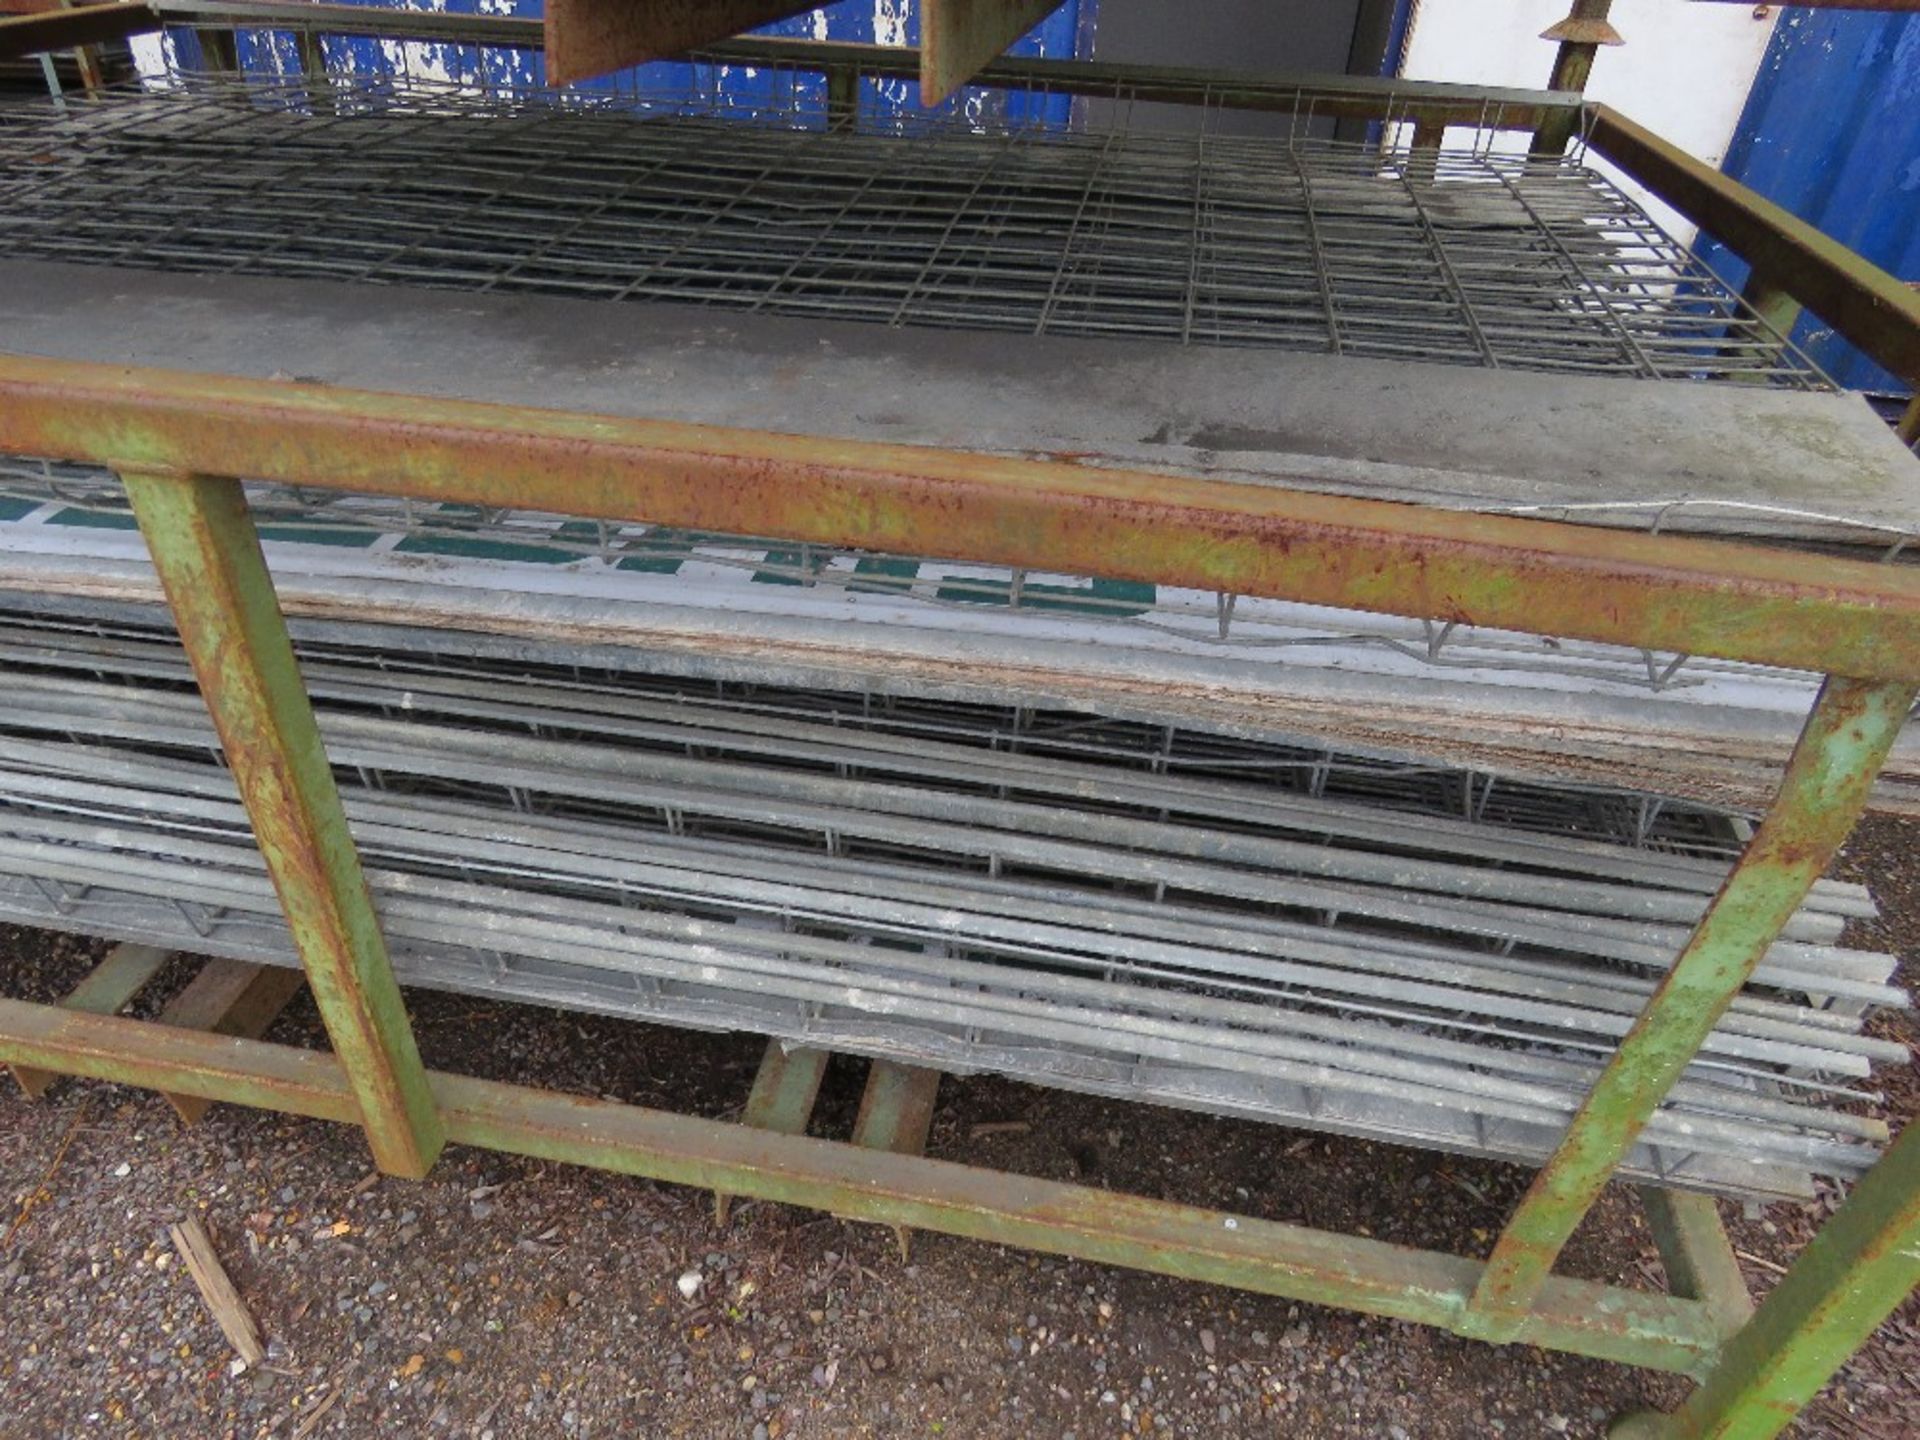 2 X LARGE STILLAGE OF SCAFFOLD SAFETY MESH PANELS, 8FT X 4FT APPROX. - Image 3 of 3